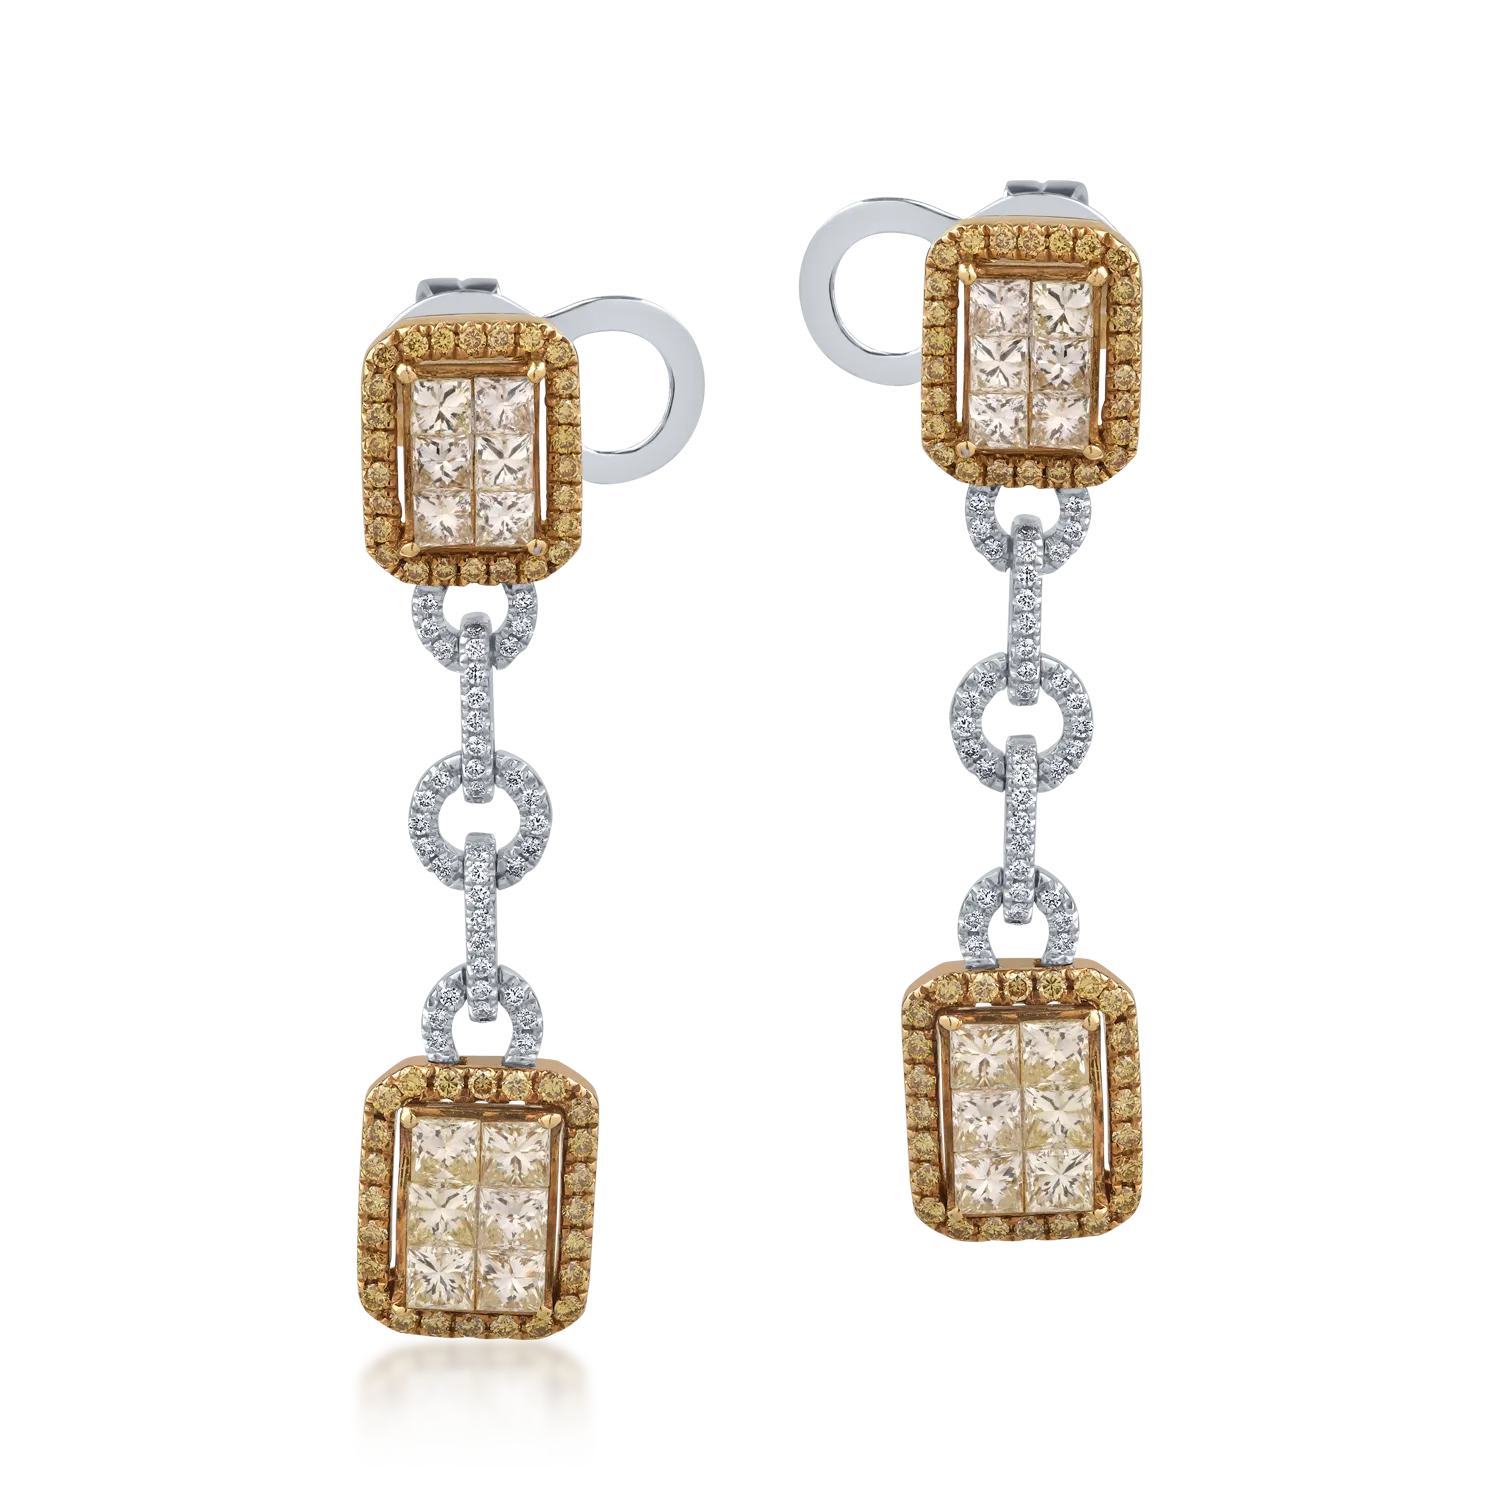 18K yellow-white gold earrings with 2.91ct diamonds